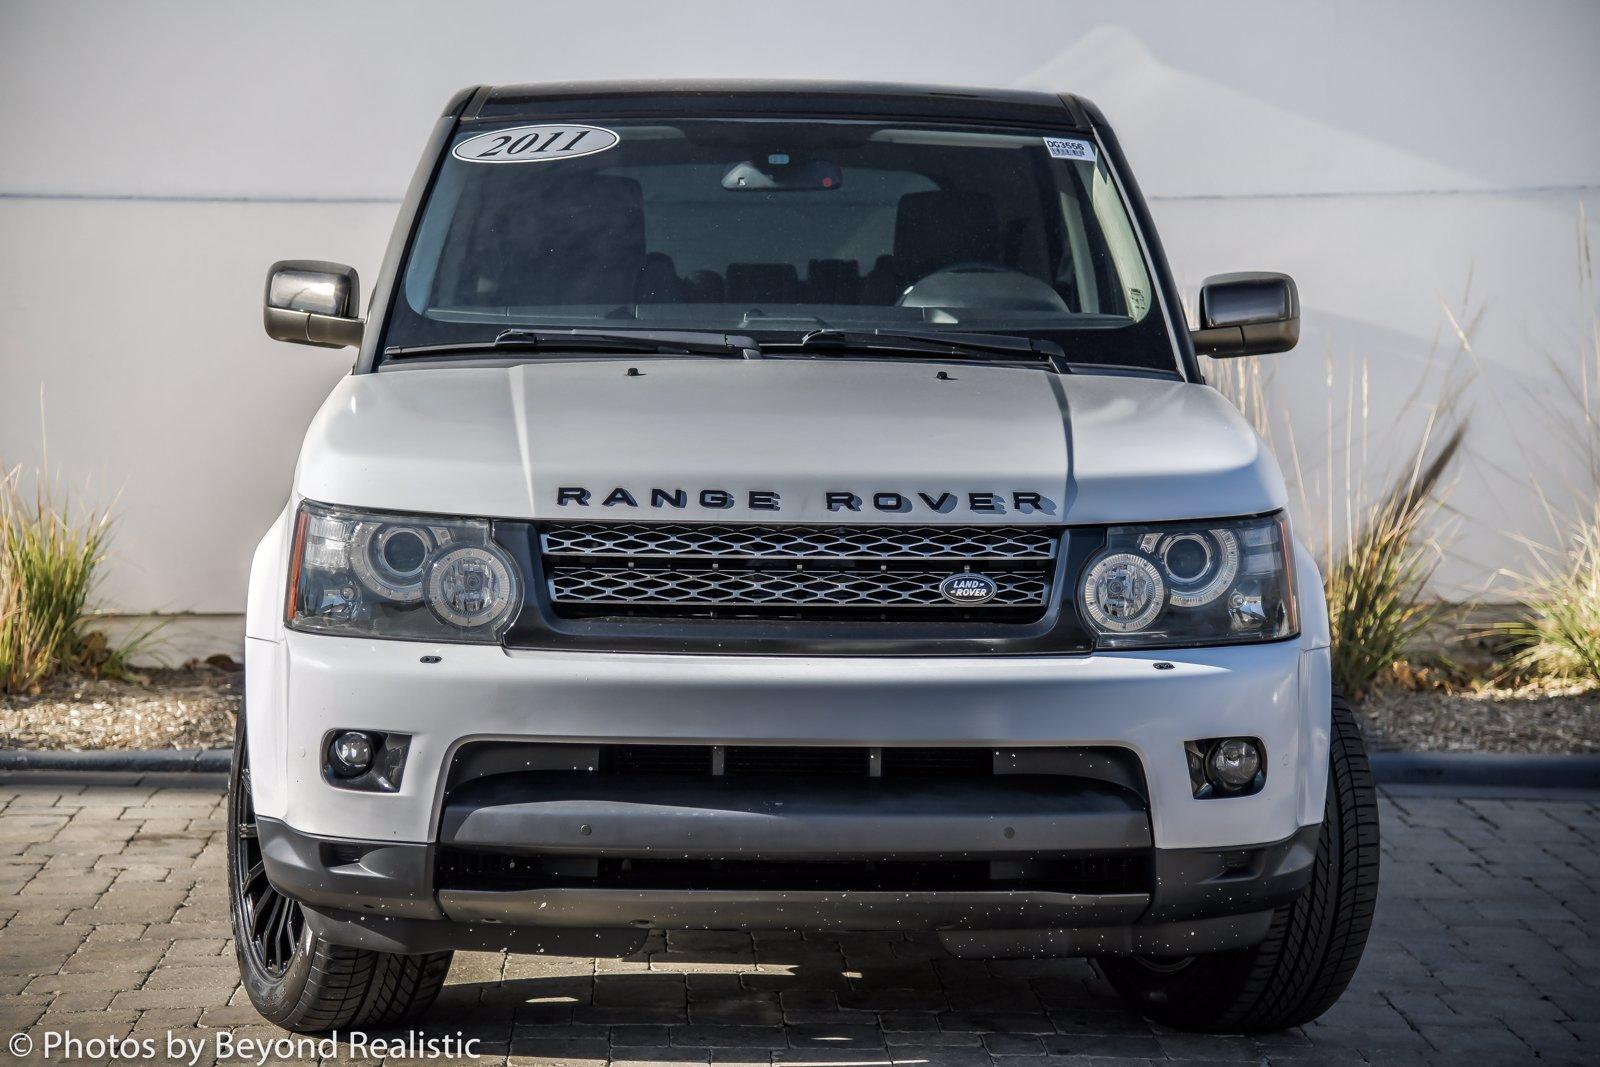 Used 2011 Land Rover Range Rover Sport HSE | Downers Grove, IL